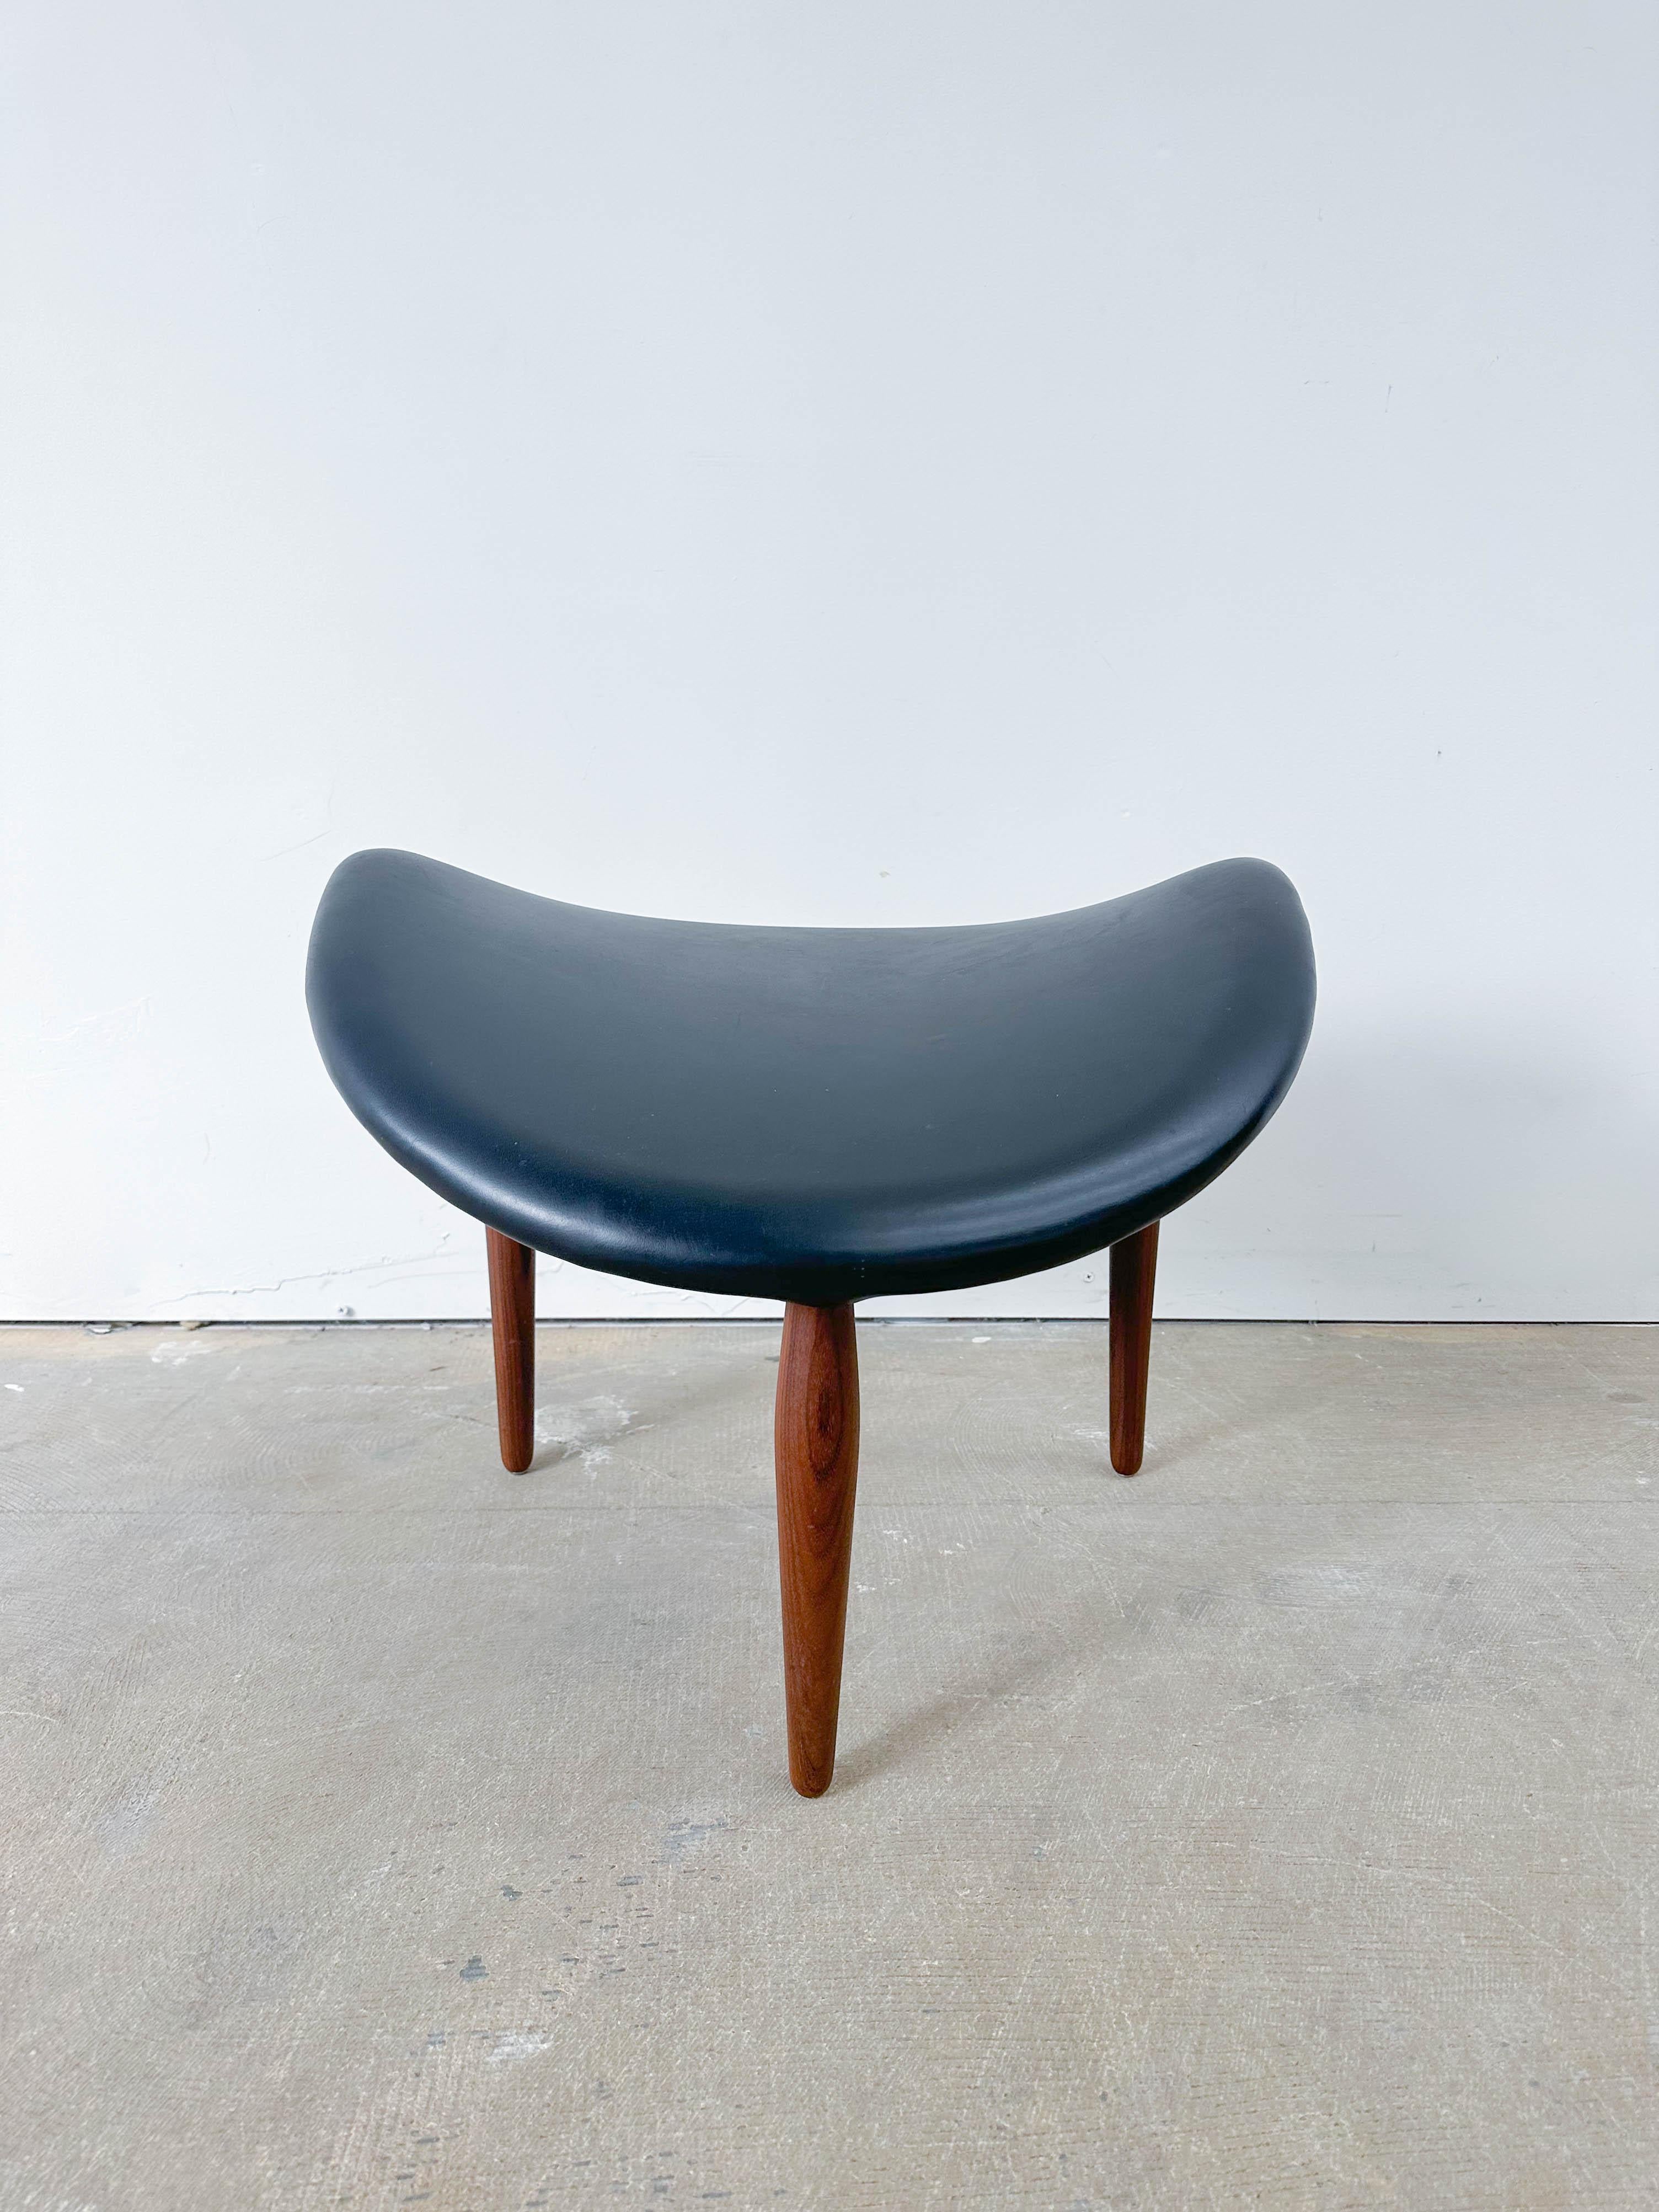 Hard to find sculptural and organic modern ottoman deisgned by H.W. Klein for Bramin in the 1950s. Typically paired with the dramatic wingback chair Klein also designed, this ottoman packs a solid design punch with its hyperbolic parabaloid surface